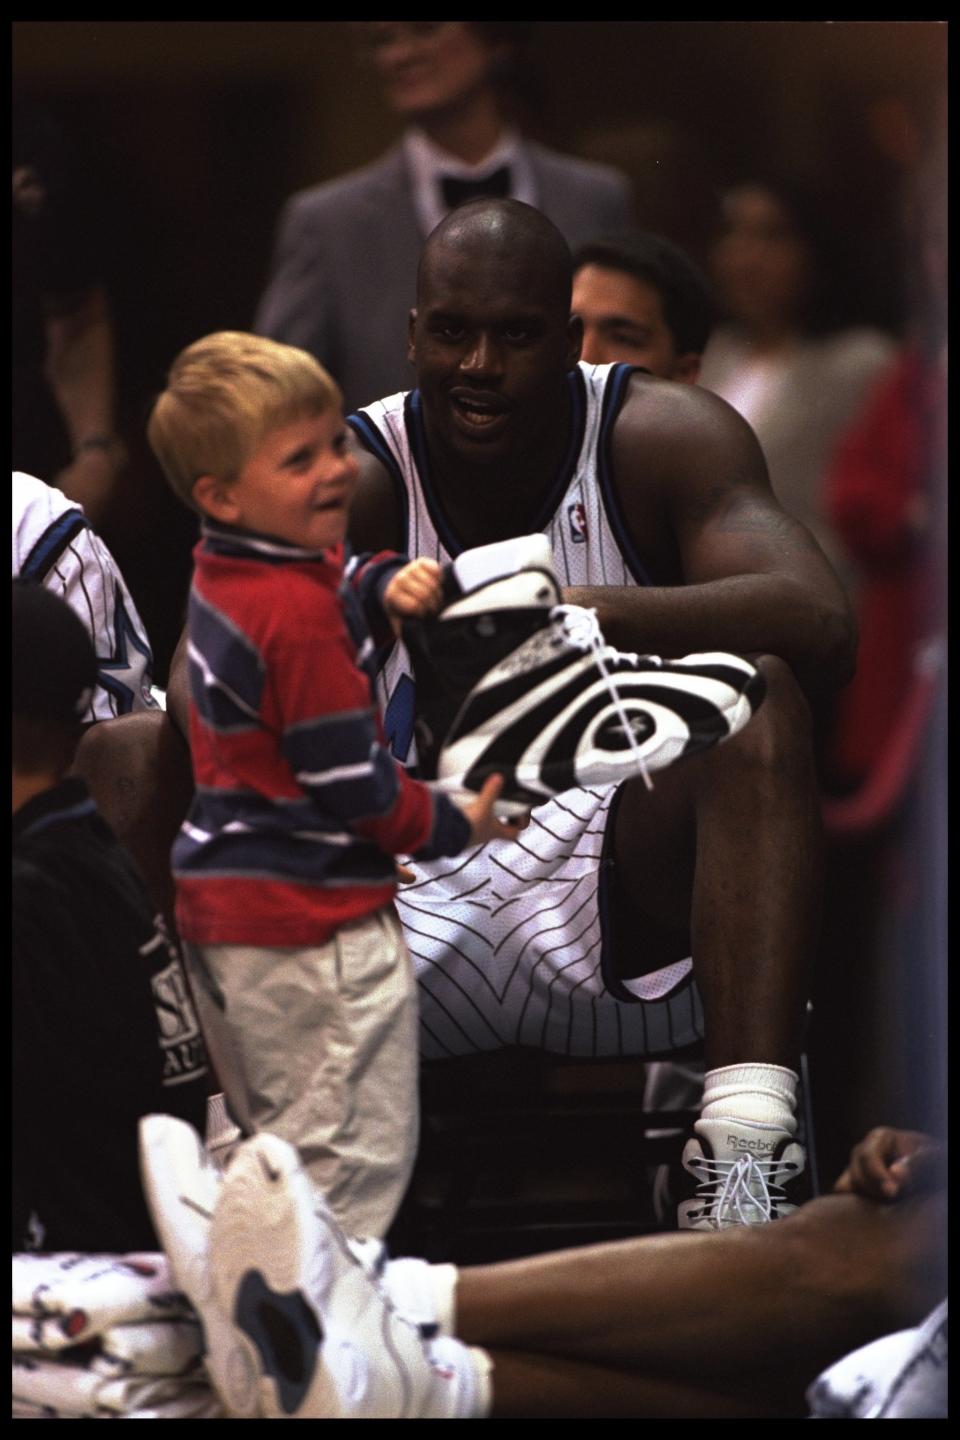 Shaquille O'Neal talks with a young fan during a game against the Milwaukee Bucks played at the Orlando Arena in Orlando, Florida on February 16, 1996. The Magic won the game, 121-91.